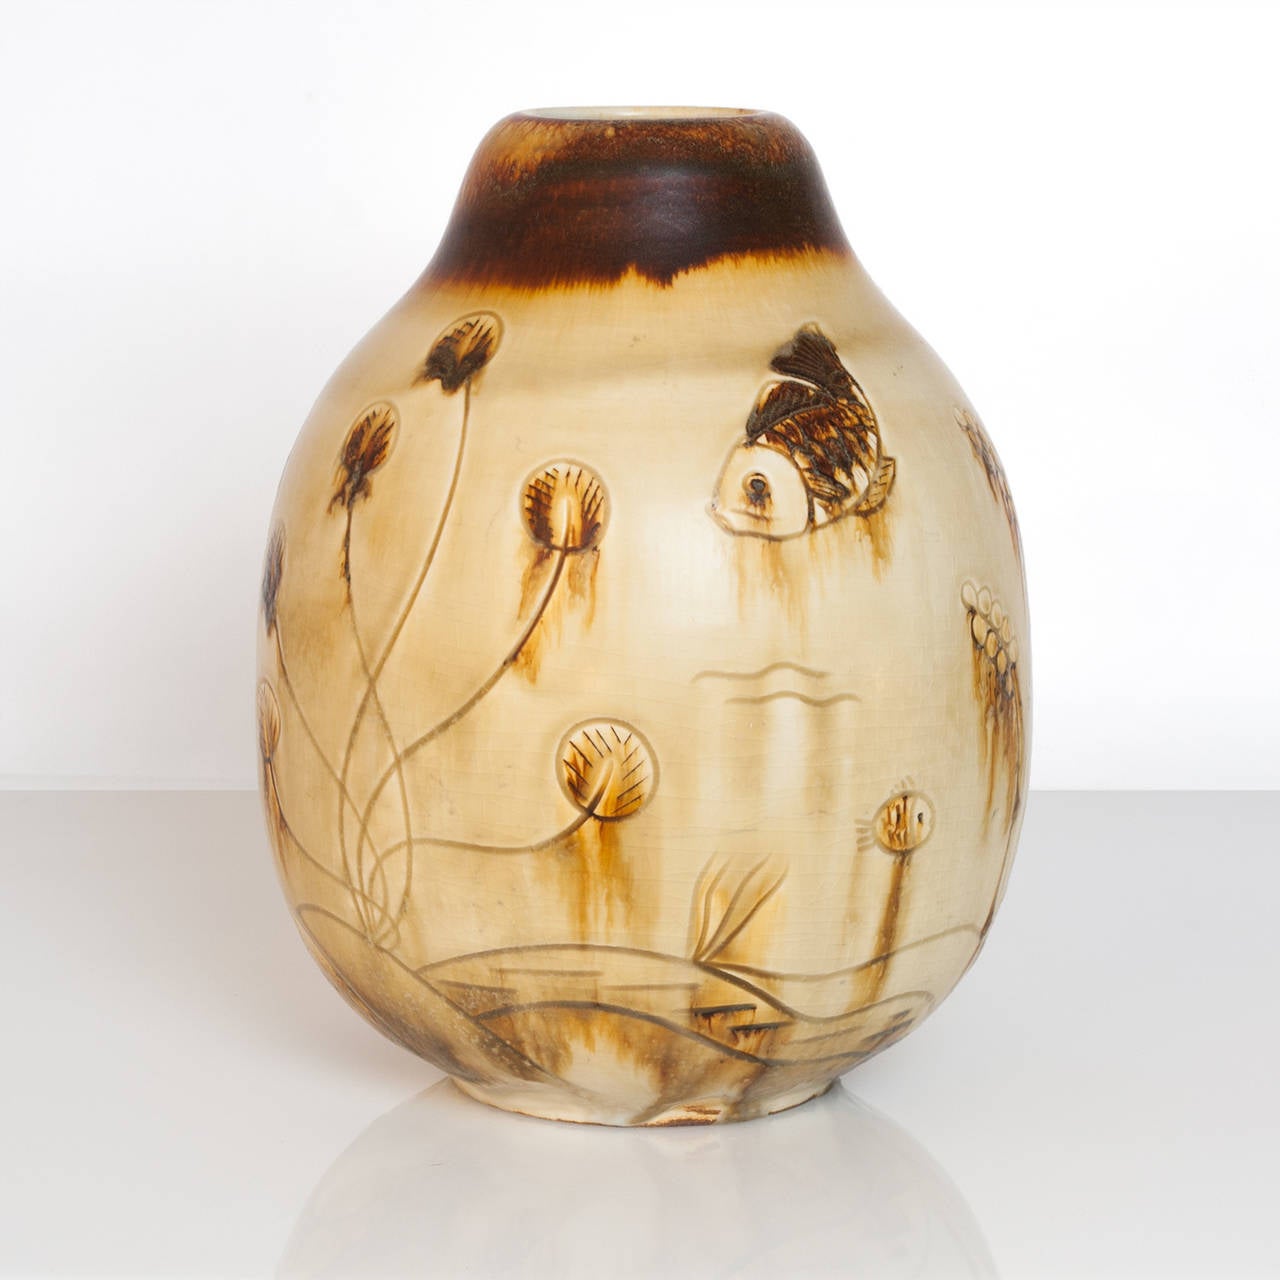 Large Scandinavian Modern unique ceramic studio vase by Gertrud Lonegren for Rorstrand. This vase depicts an underwater scene with various fish and plants. Her pieces are known for textured surfaces combined with subtle use of glazes. Created circa